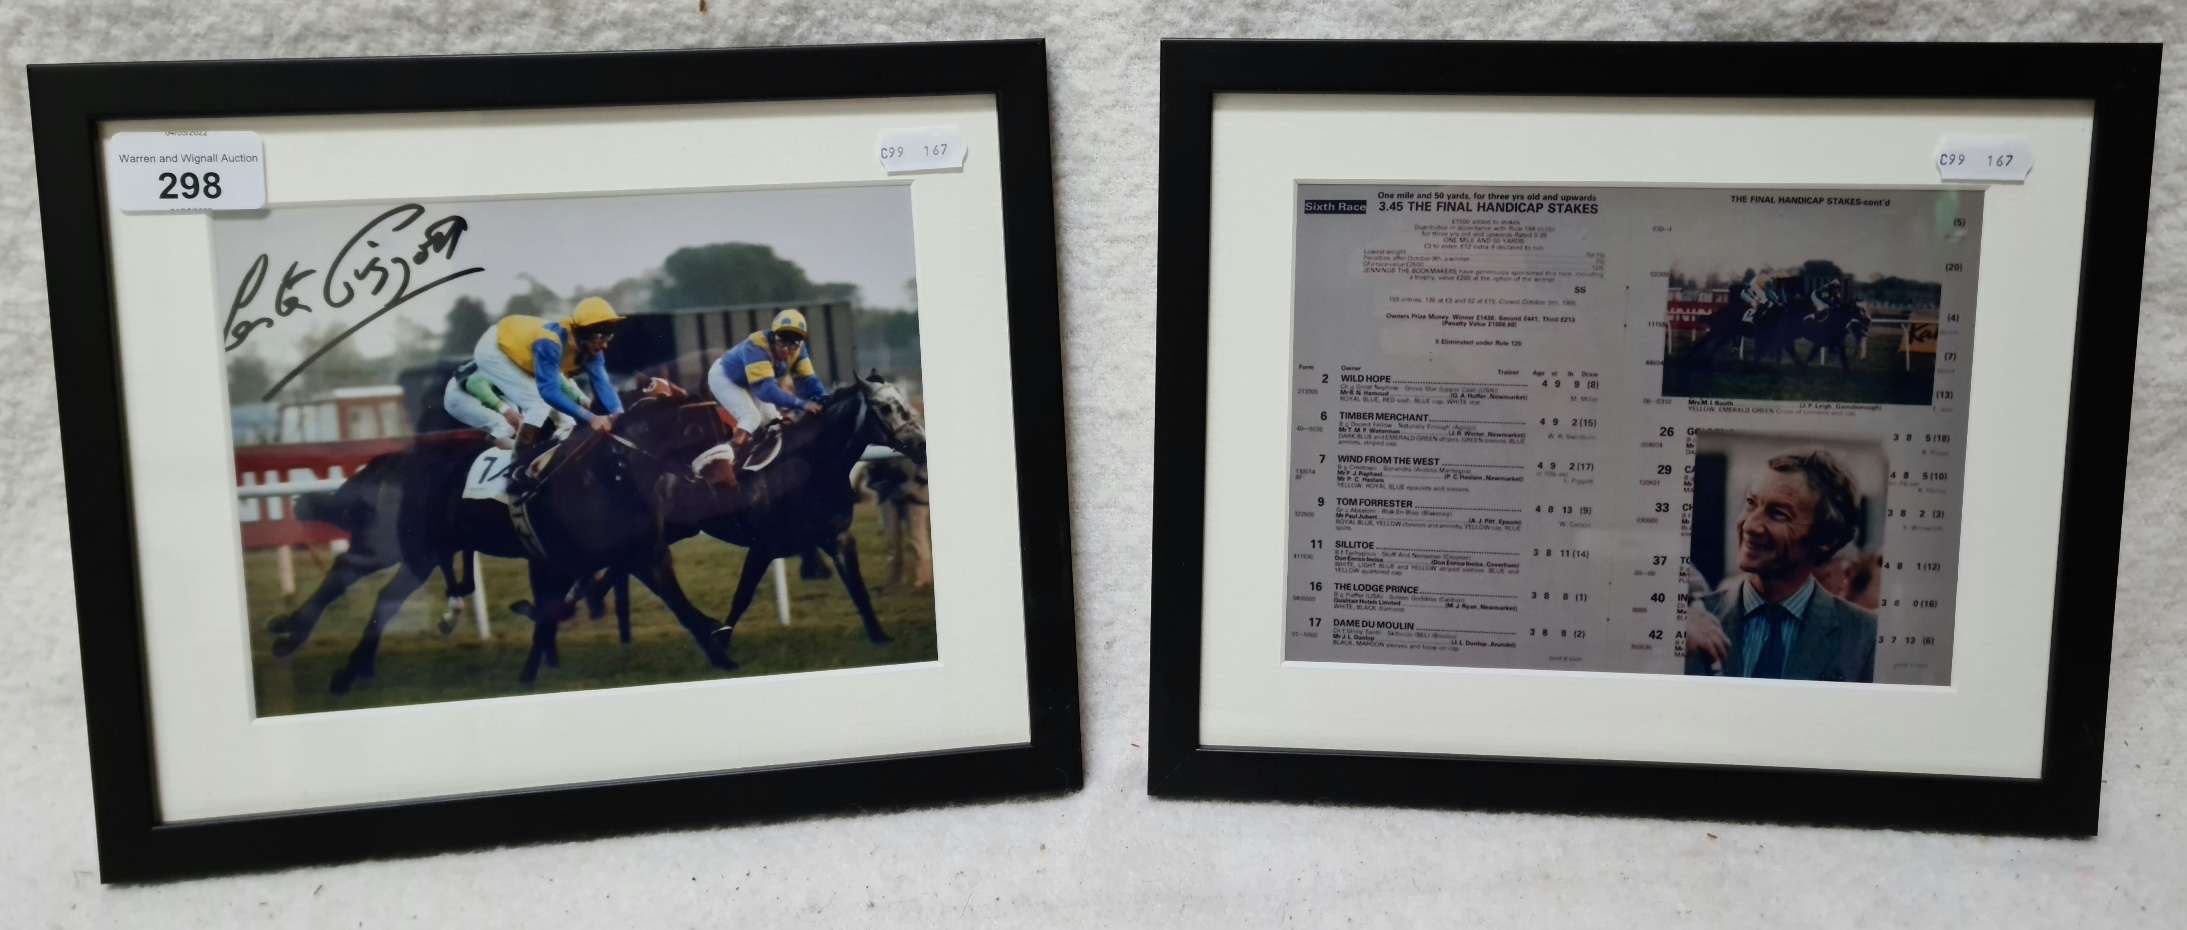 A framed signed photograph of Lester Piggott and a copy of the race card.